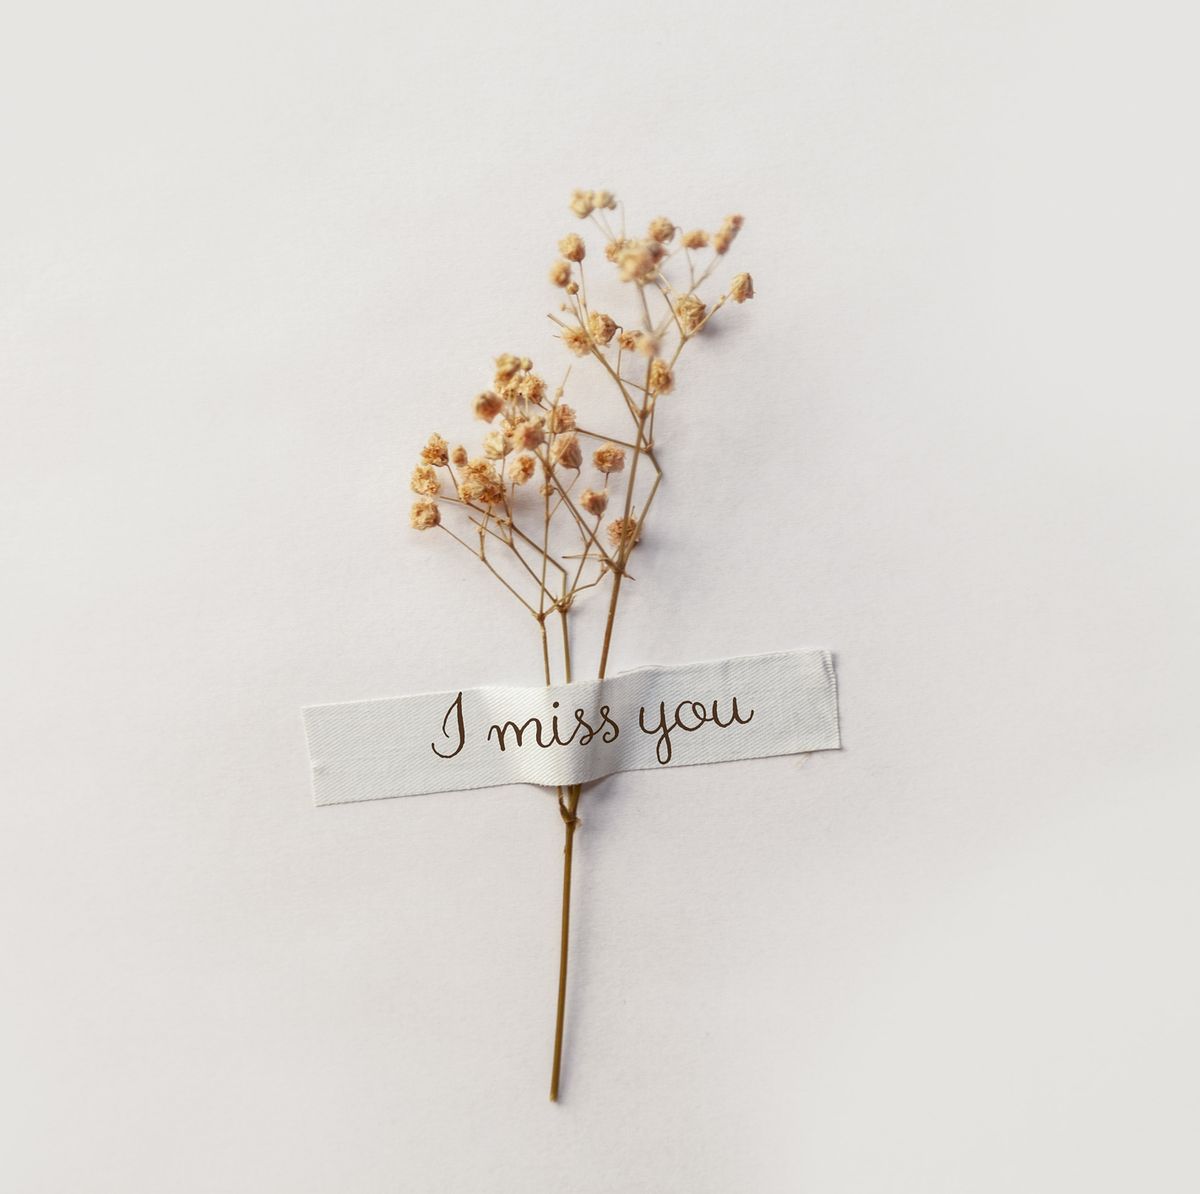 I Miss You and Missing You Quotes for Him, Her, Family, Friends